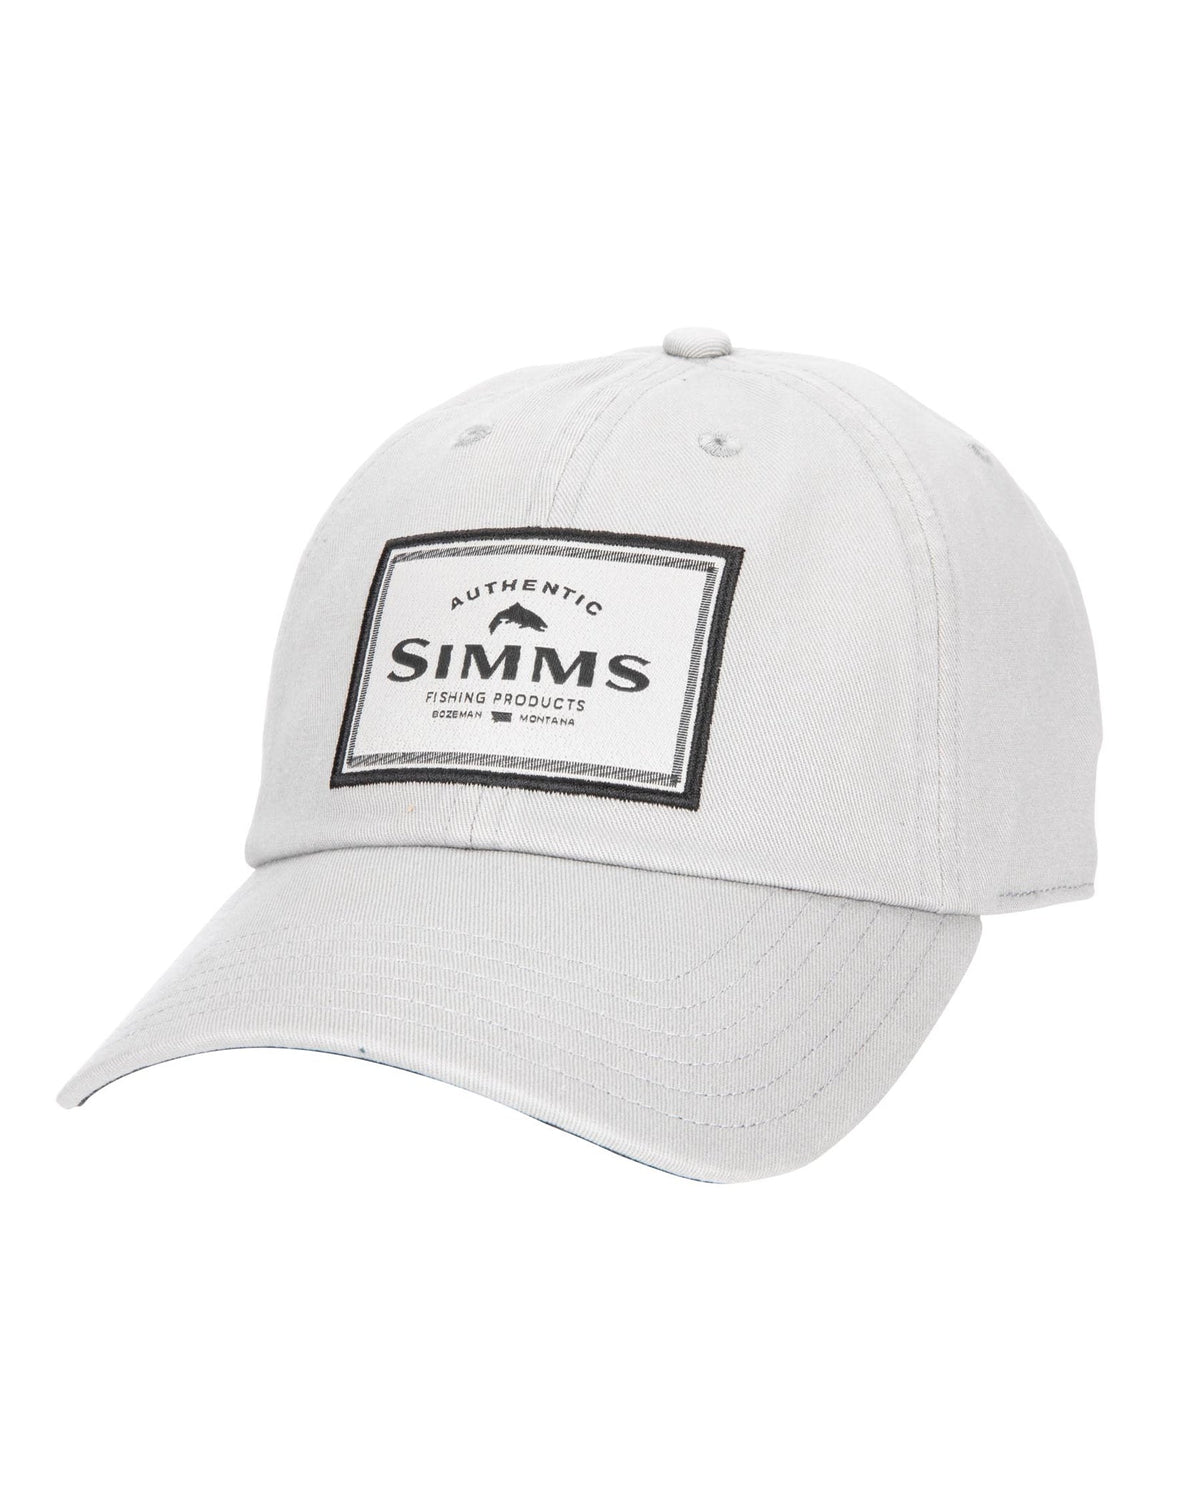 Find great deals on Single Haul Cap - Sterling Simms at our store now